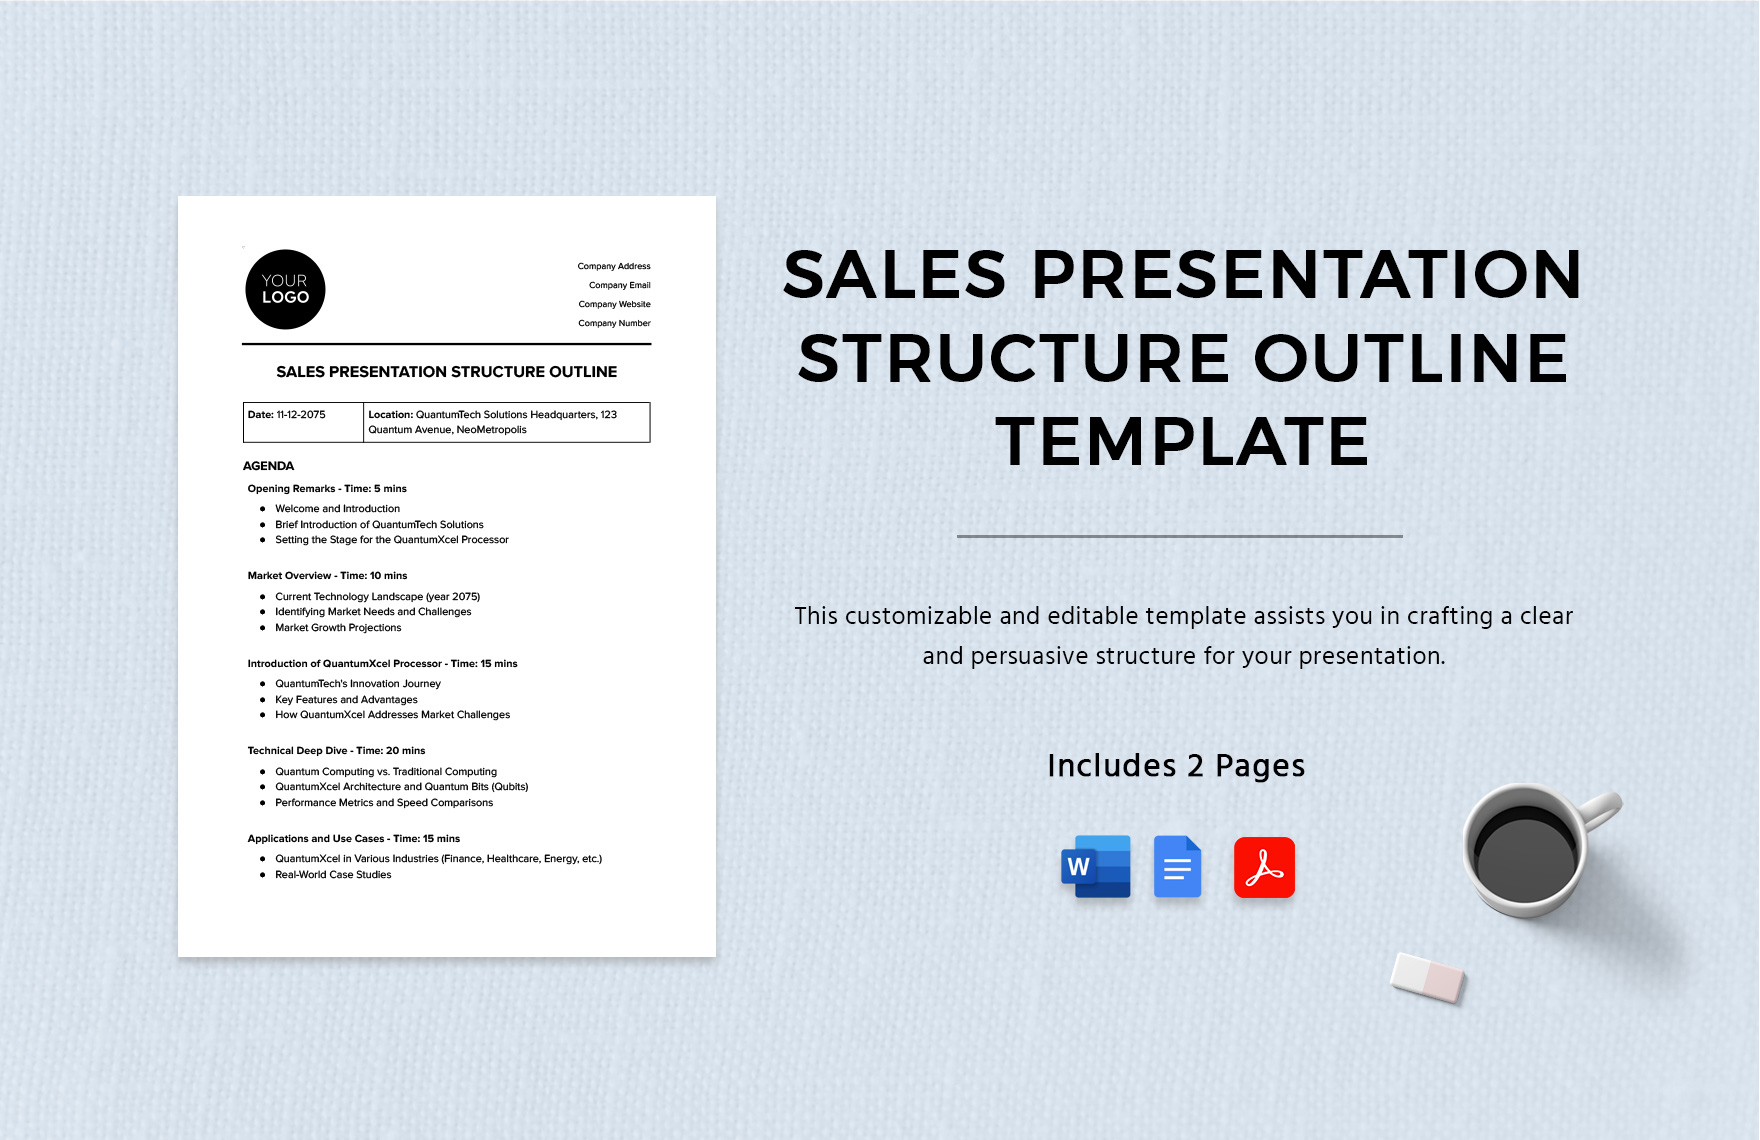 Sales Presentation Structure Outline Template in Word, Google Docs, PDF